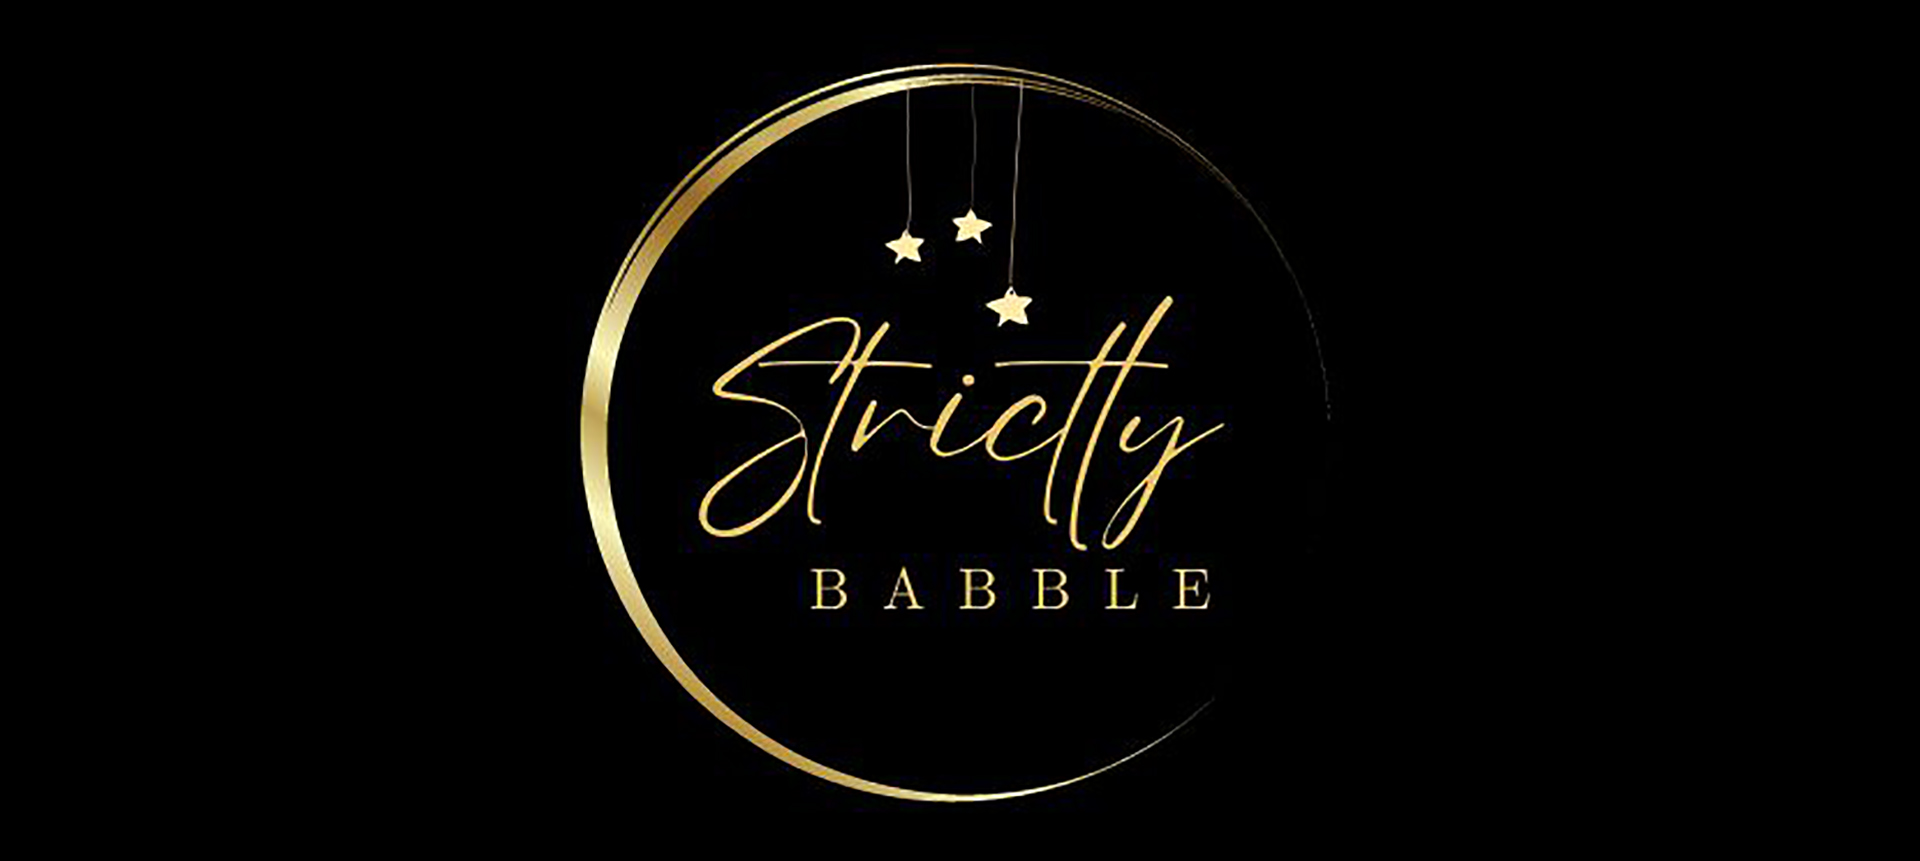 Strictly Babble